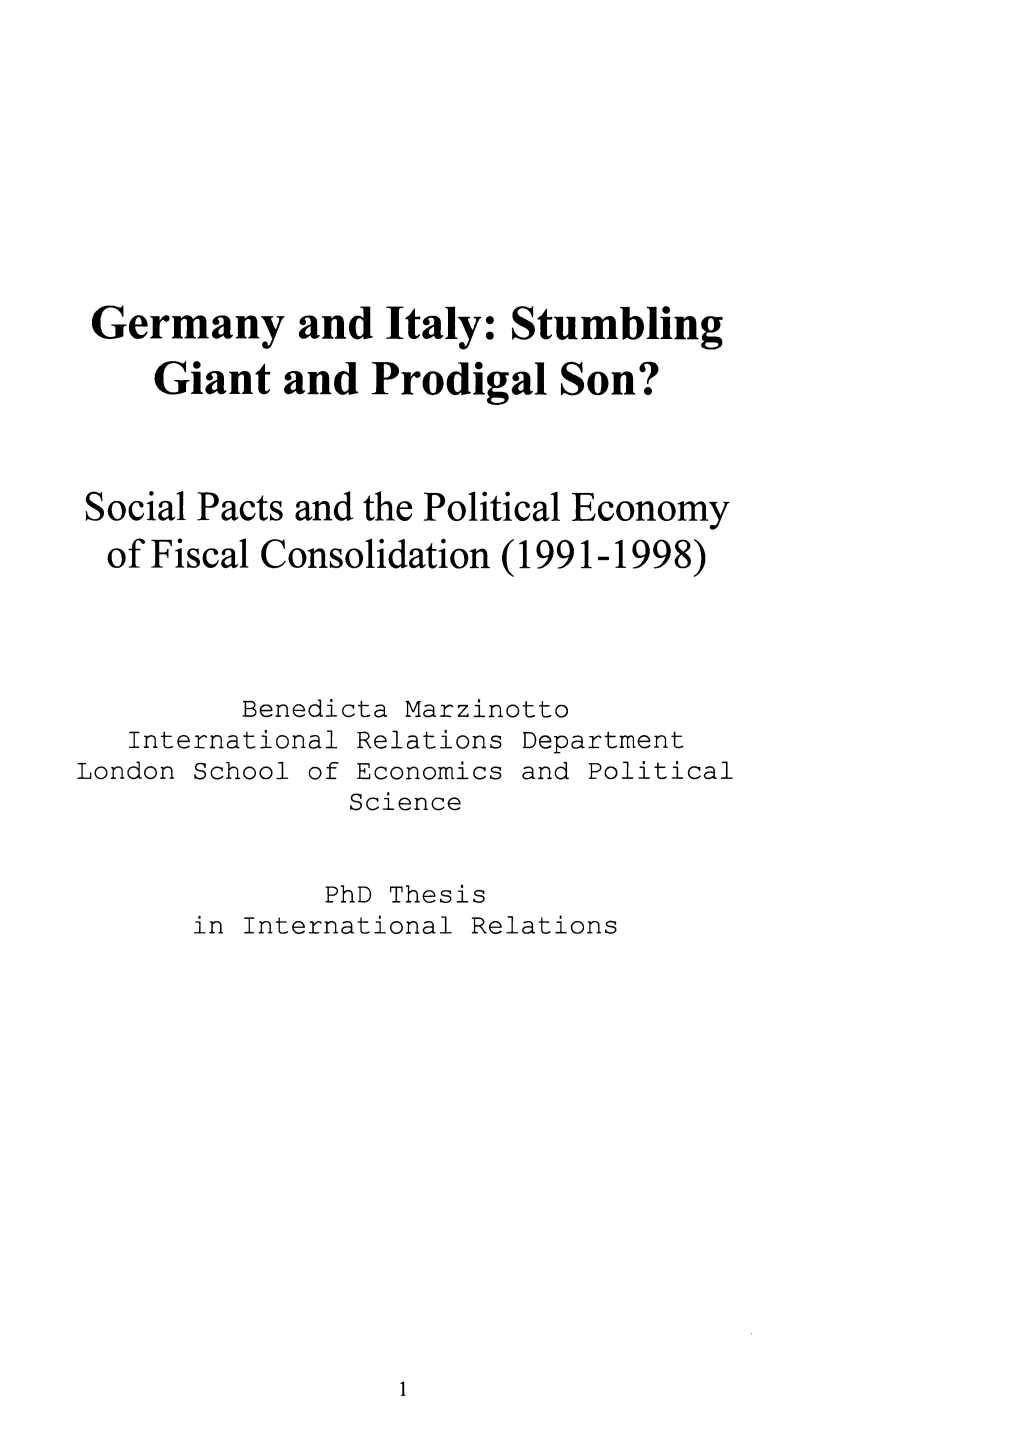 Germany and Italy: Stumbling Giant and Prodigal Son?